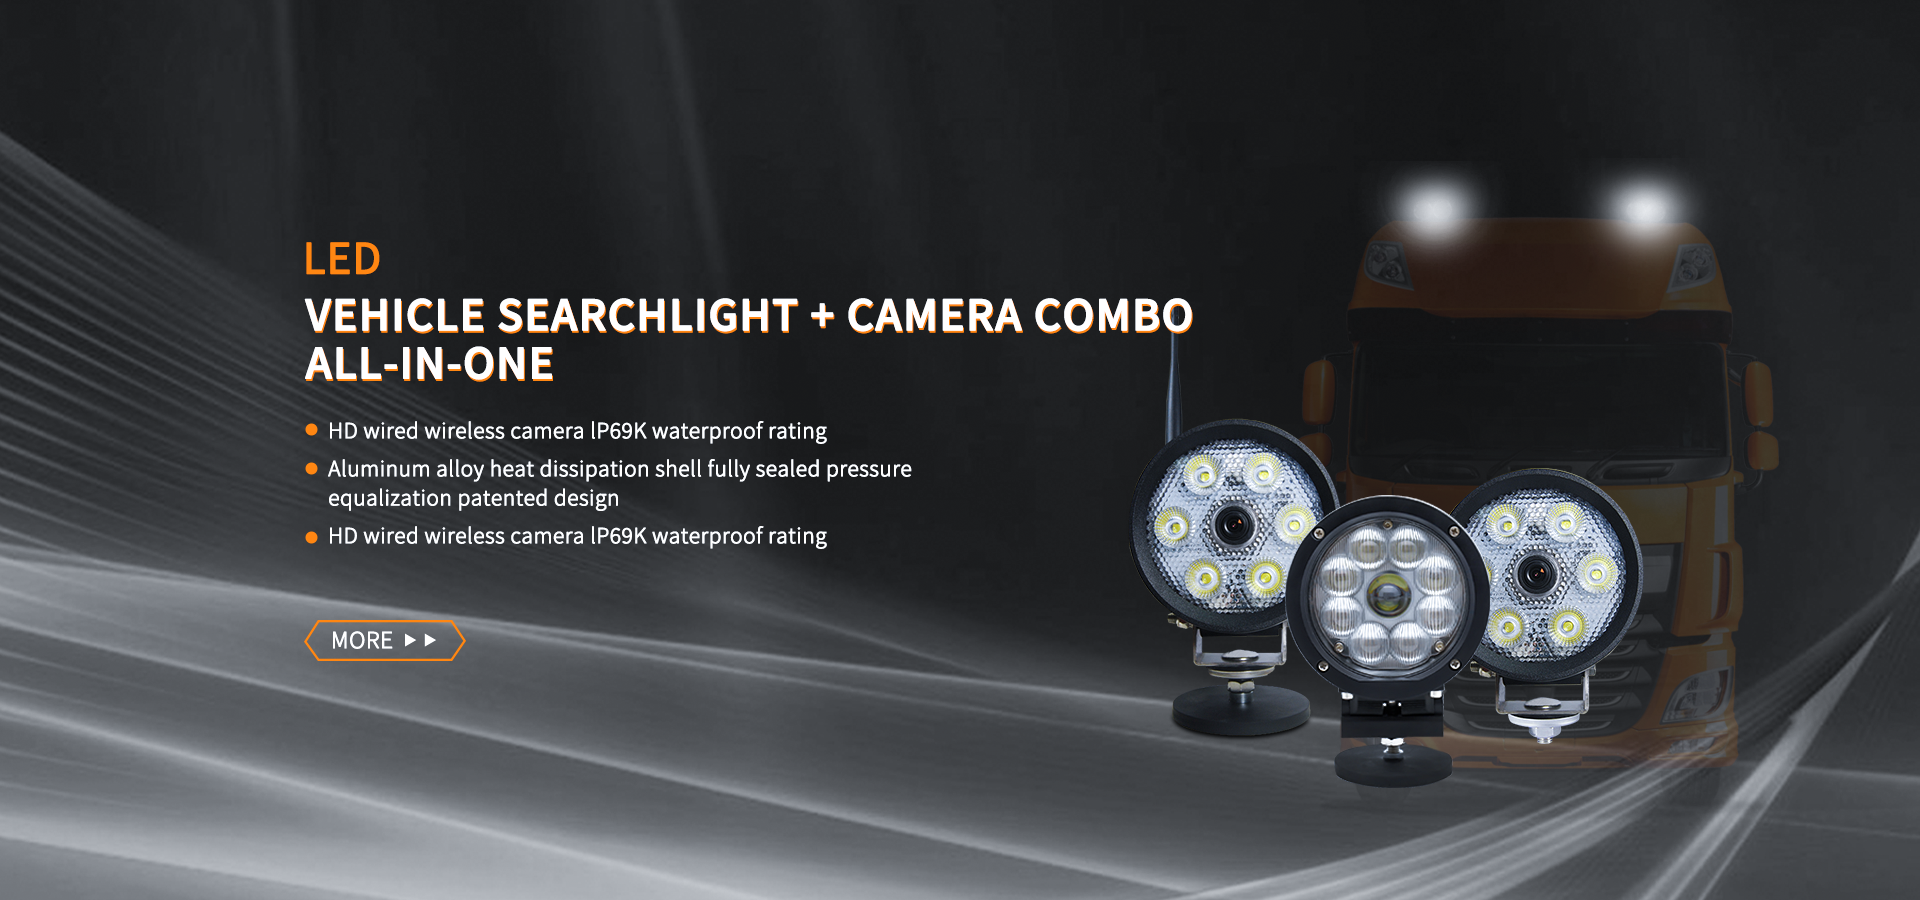 LED Vehicle Searchlight + Camera Combo All-in-One